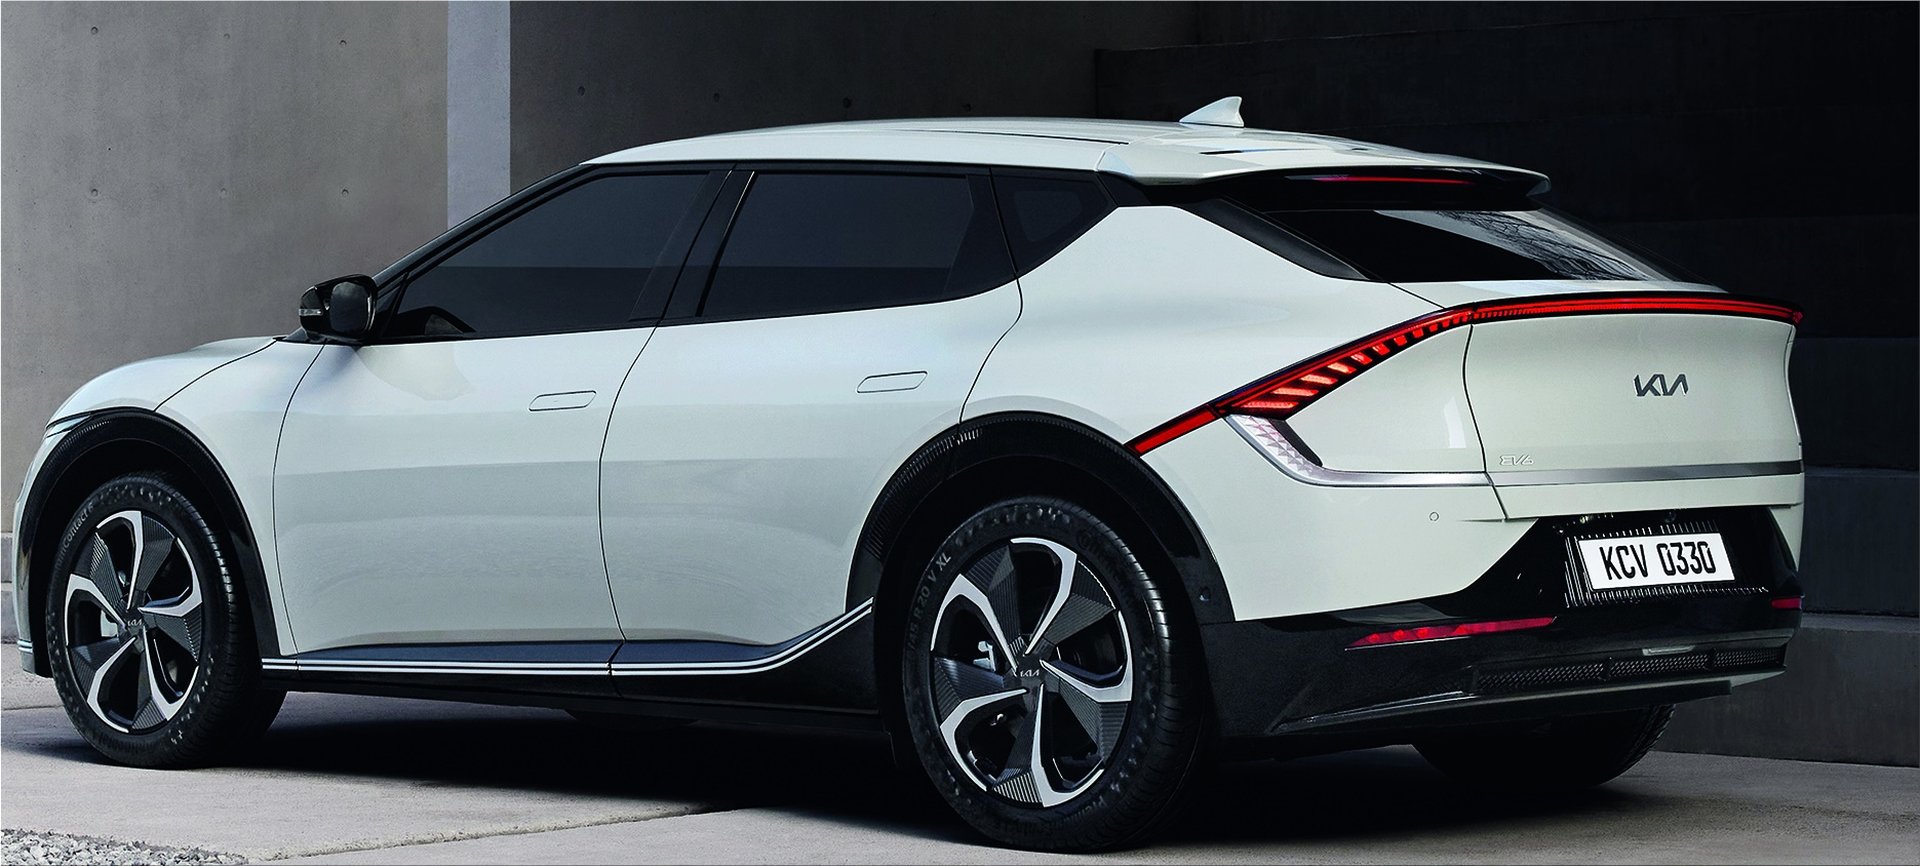 first-images-with-the-new-kia-ev6-electric-car-electric-hunter